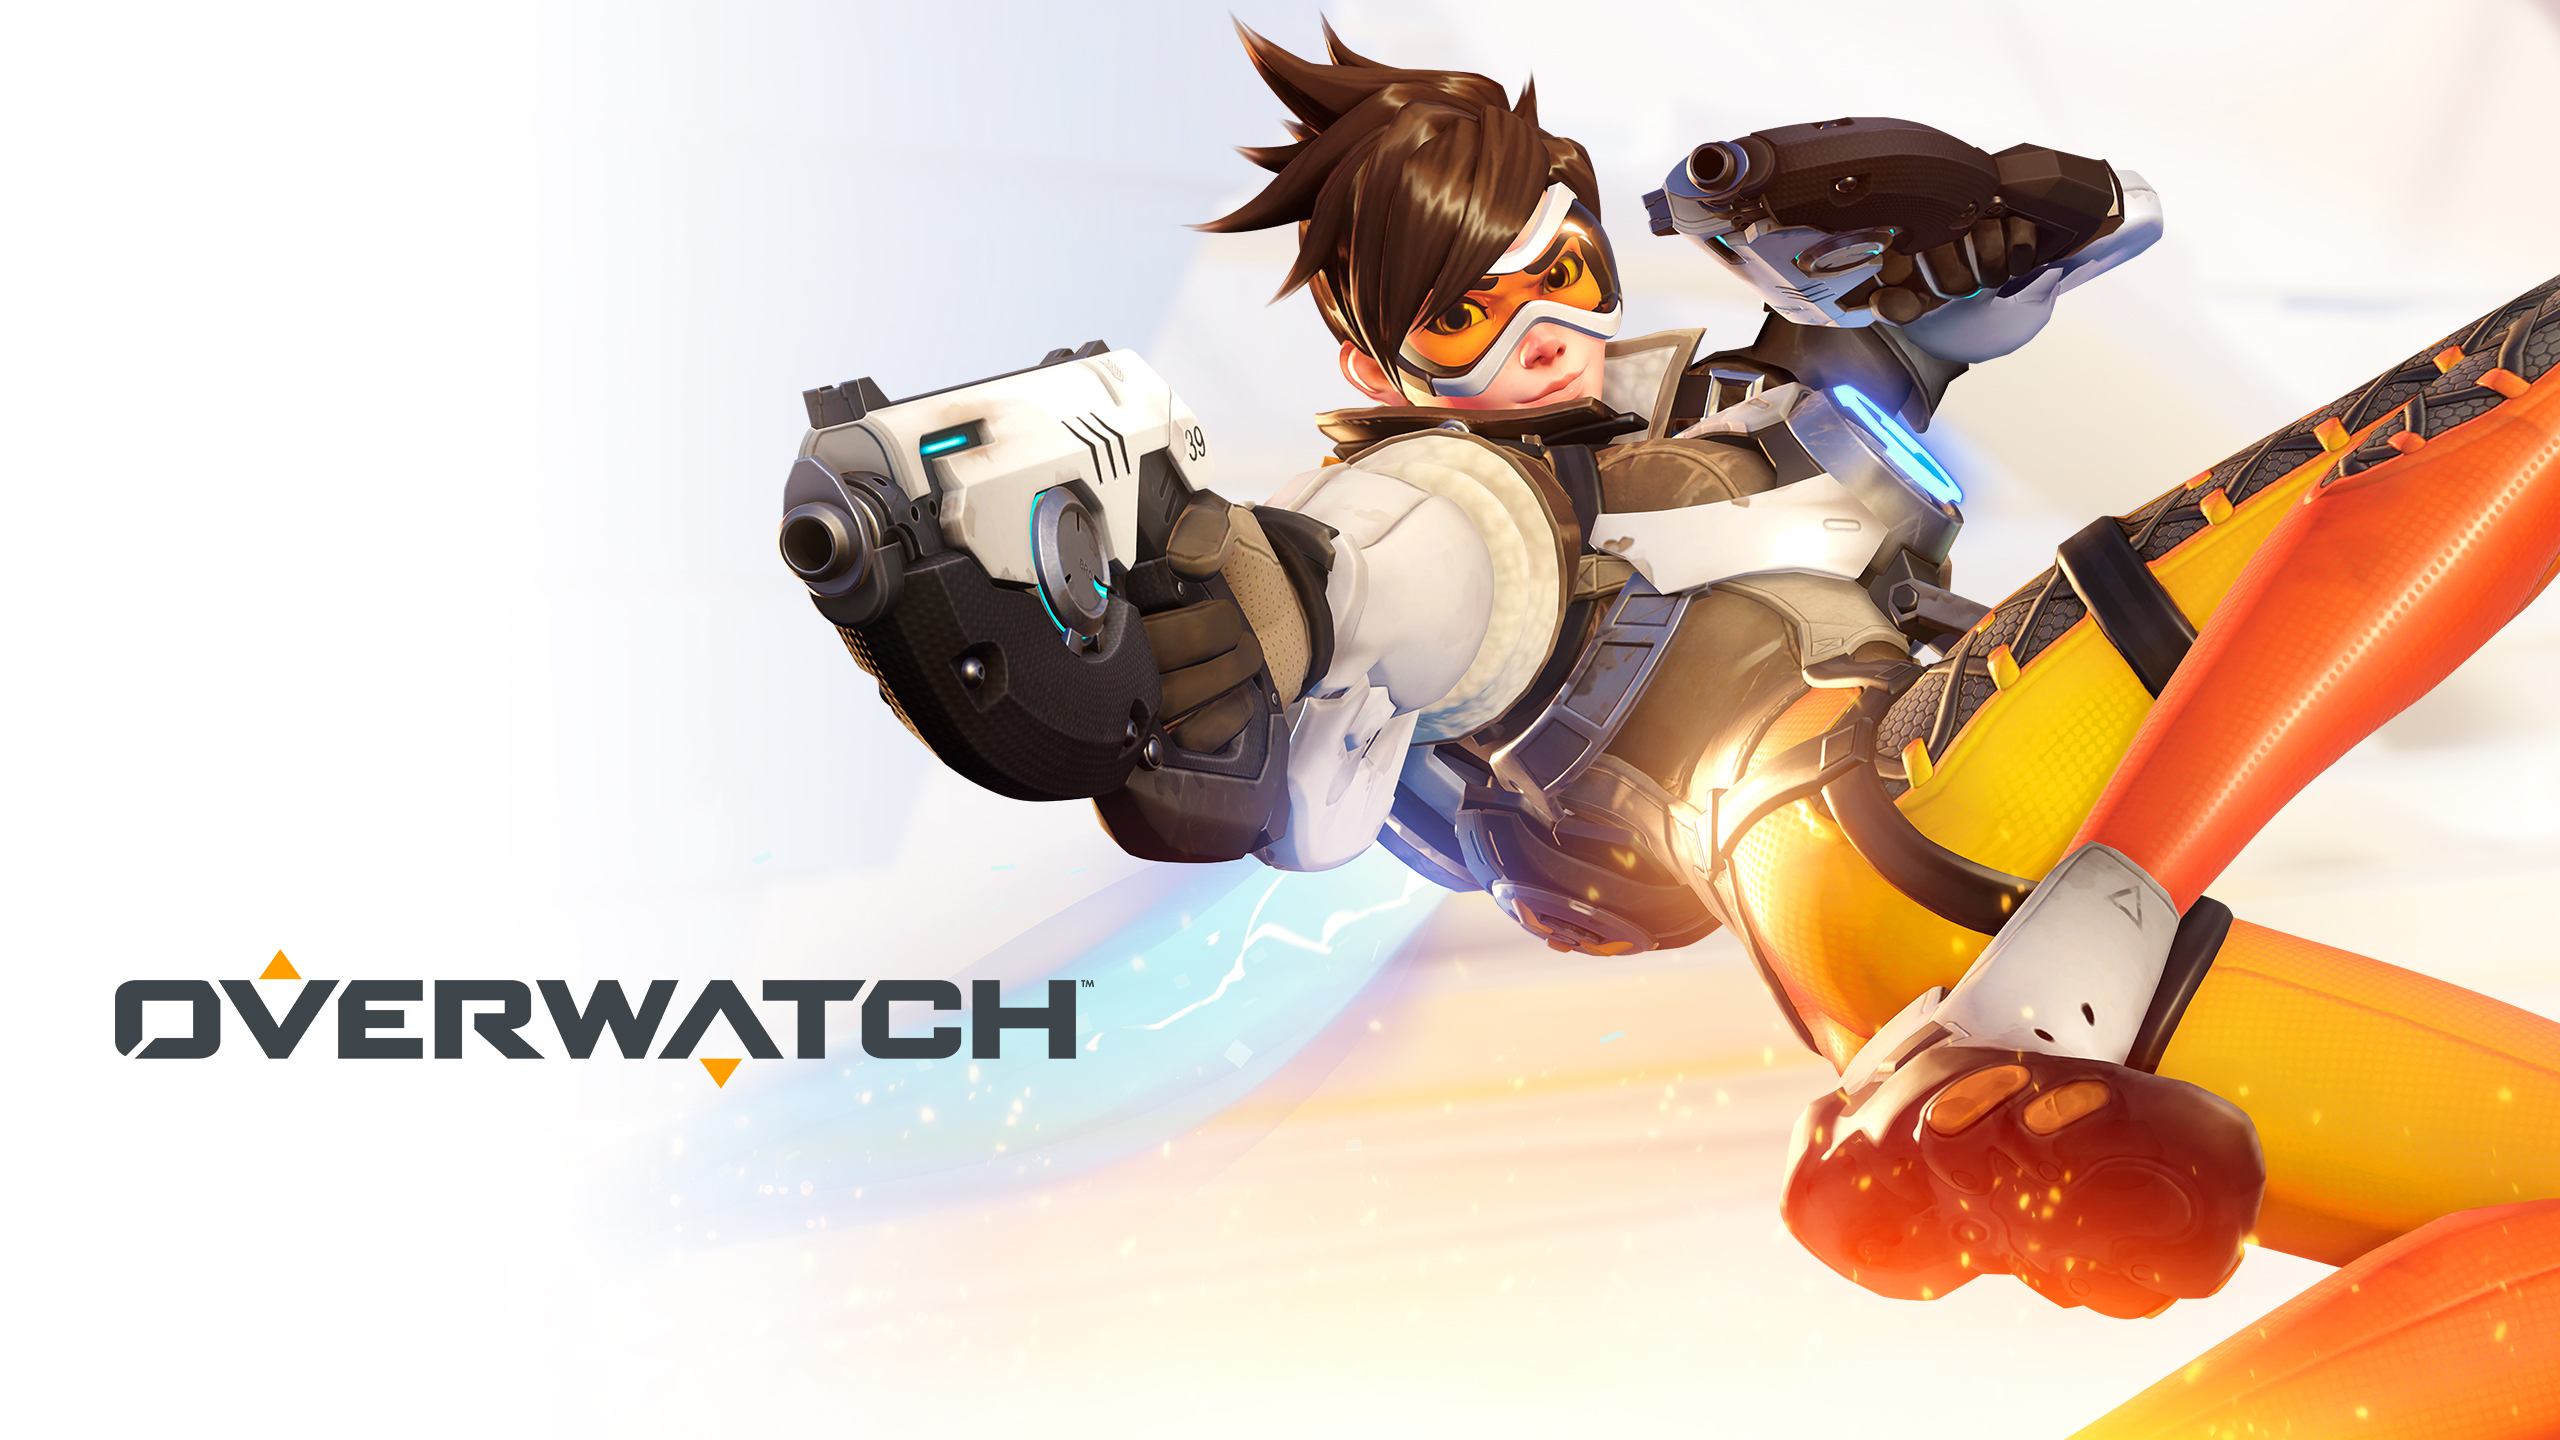 General 2560x1440 Overwatch Tracer (Overwatch) PC gaming white background simple background girls with guns video game girls video game characters